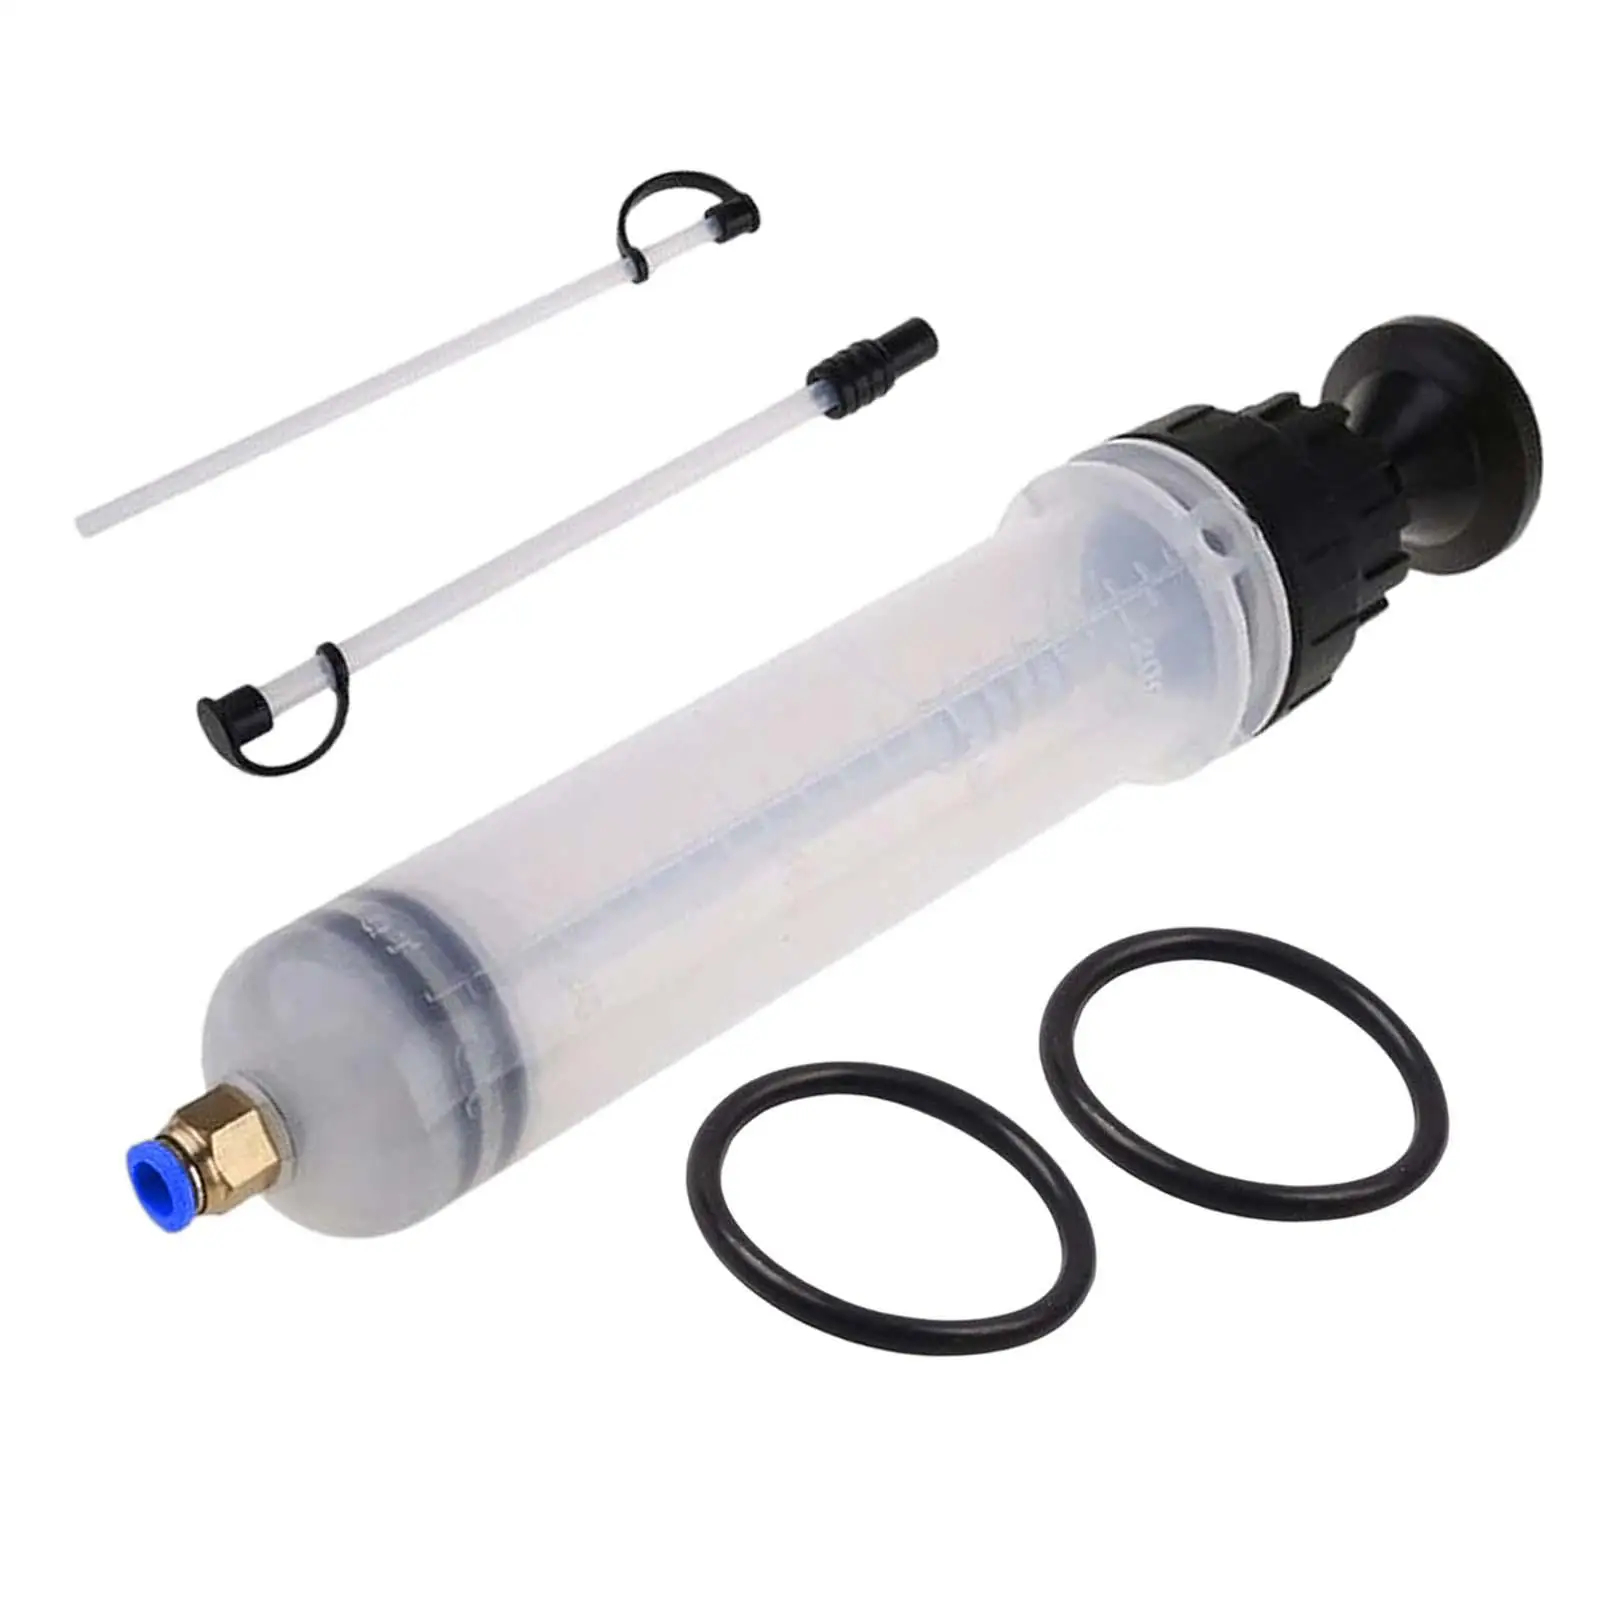 Universal Brake Fluid Extractor Fluid Transfer Hand Pump Replacement Tool Oil Change 500cc for Car Vehicles Boats ATV RV